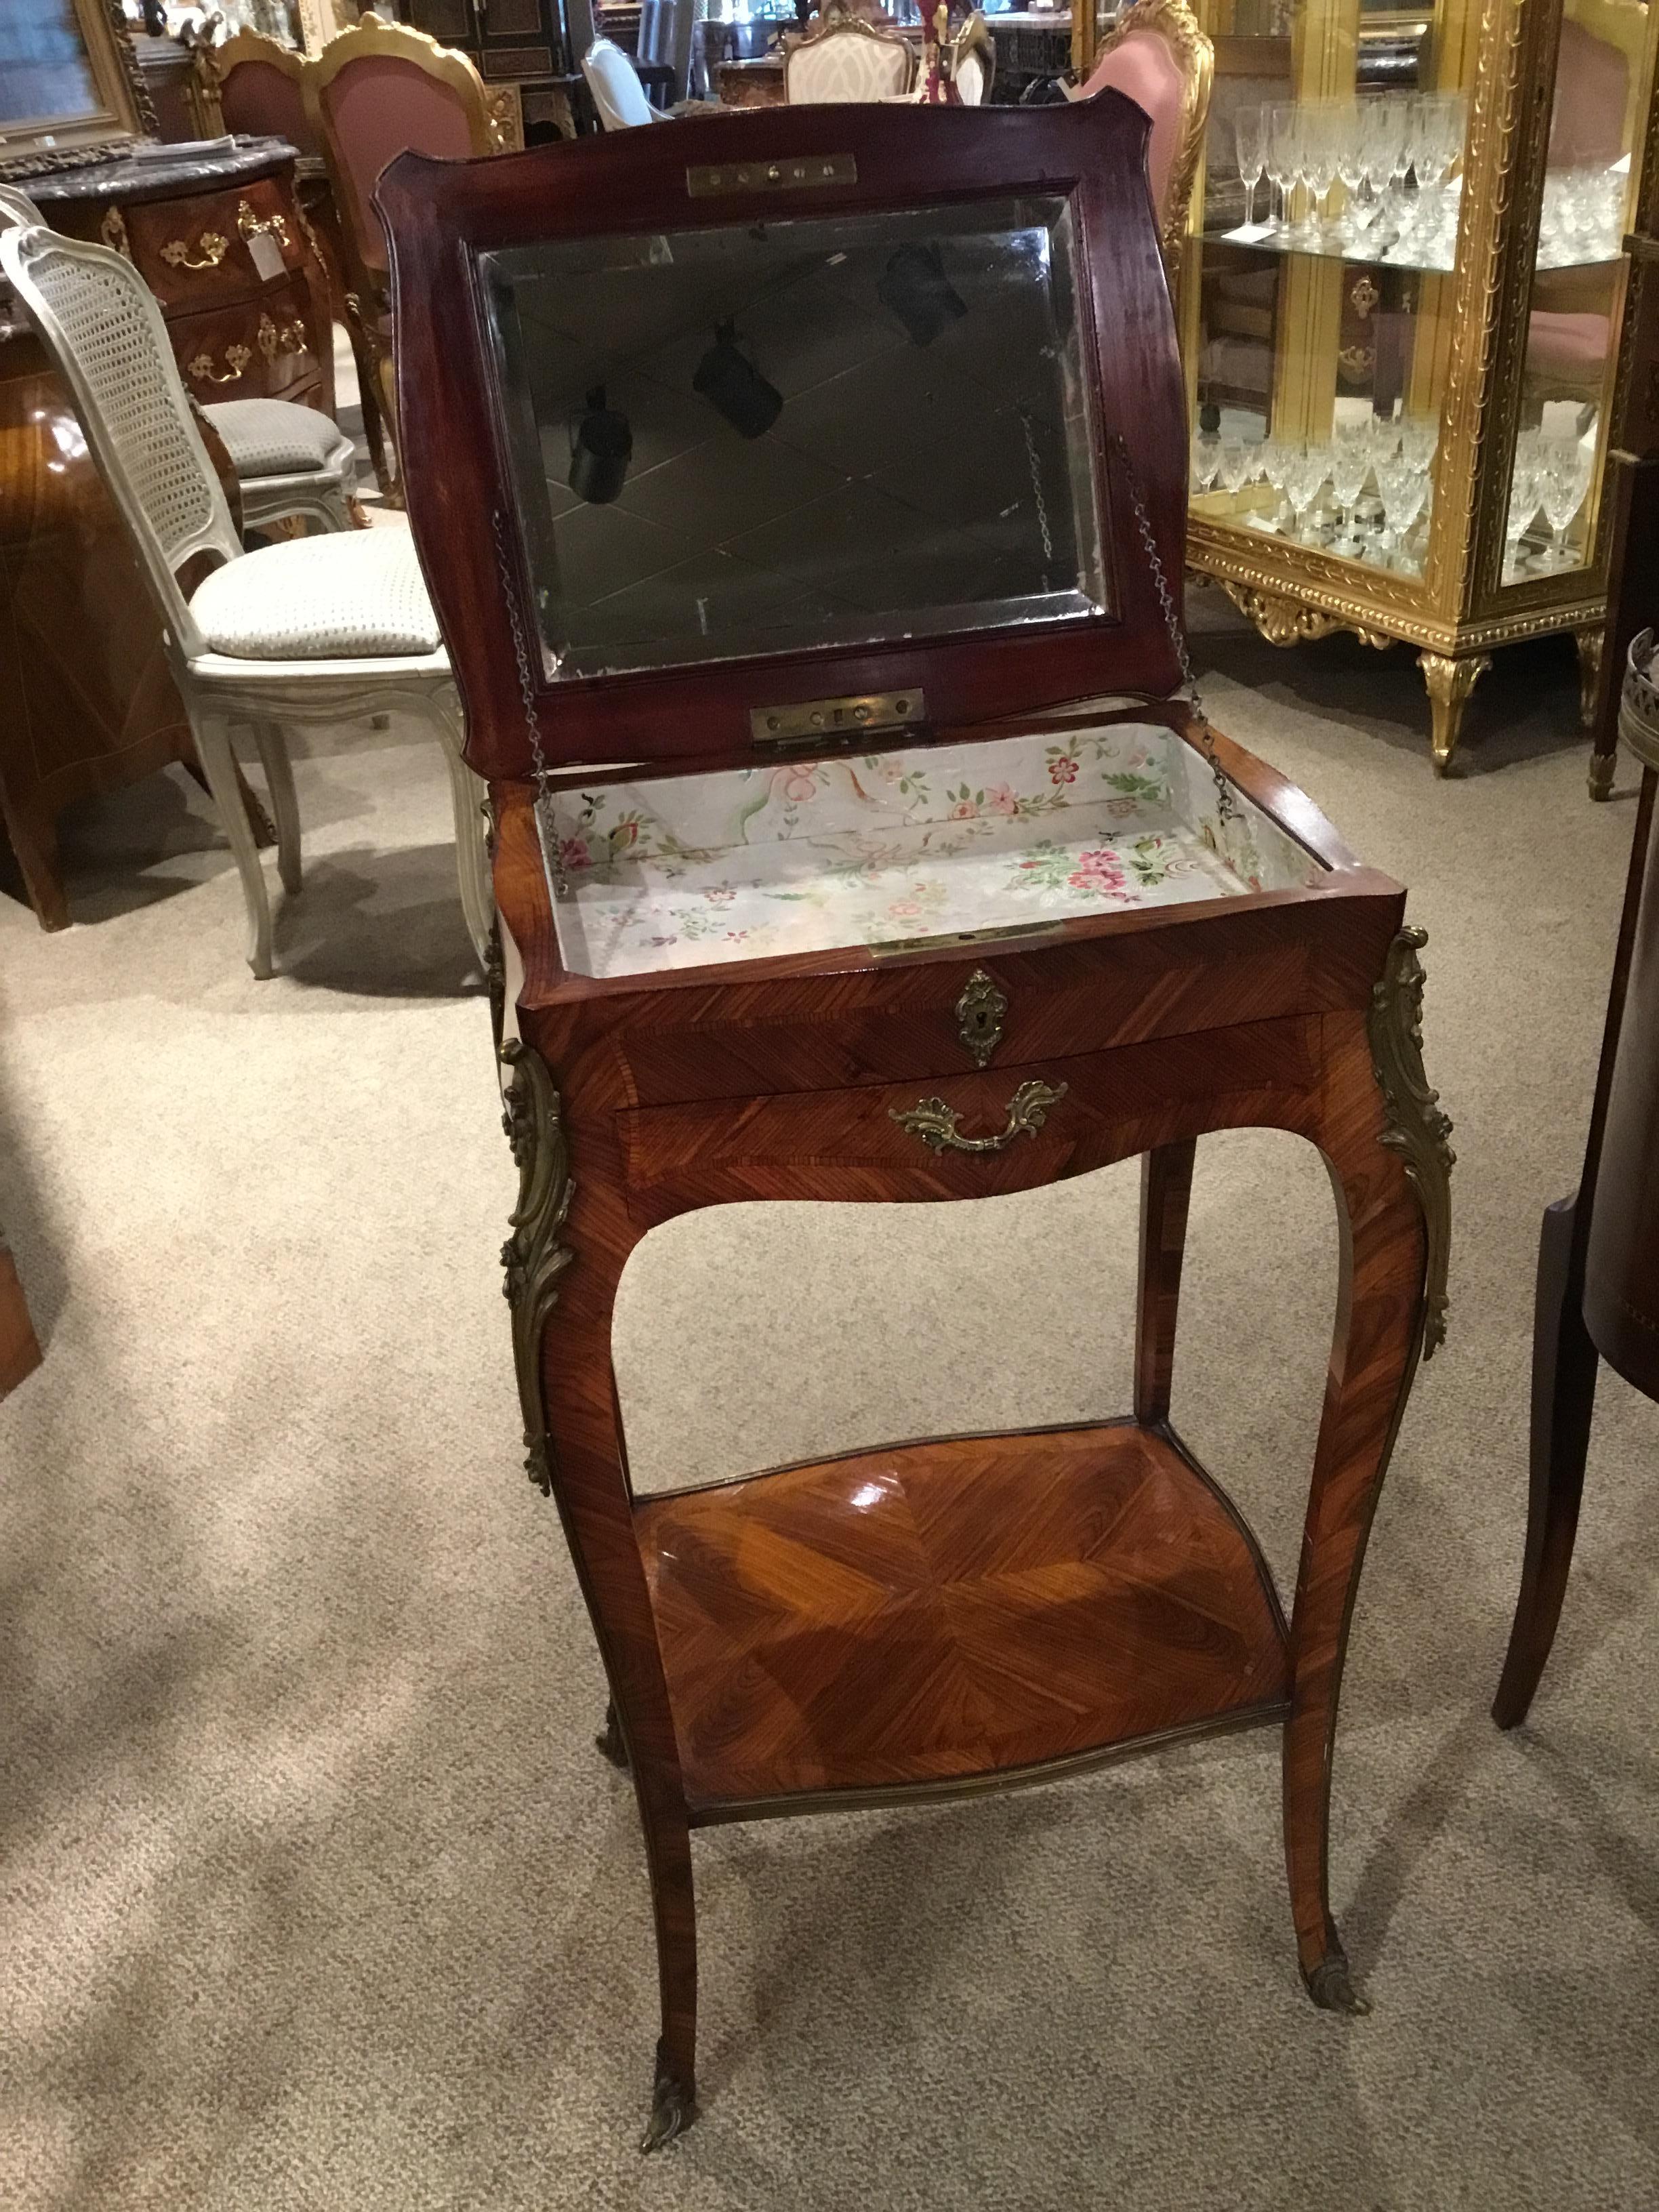 Beautifully shaped petite table with a top that lifts open to a recessed area with a beveled mirror.
Has a single drawer and a shelf on the lower tier. Has antique bronze mounts on each leg.